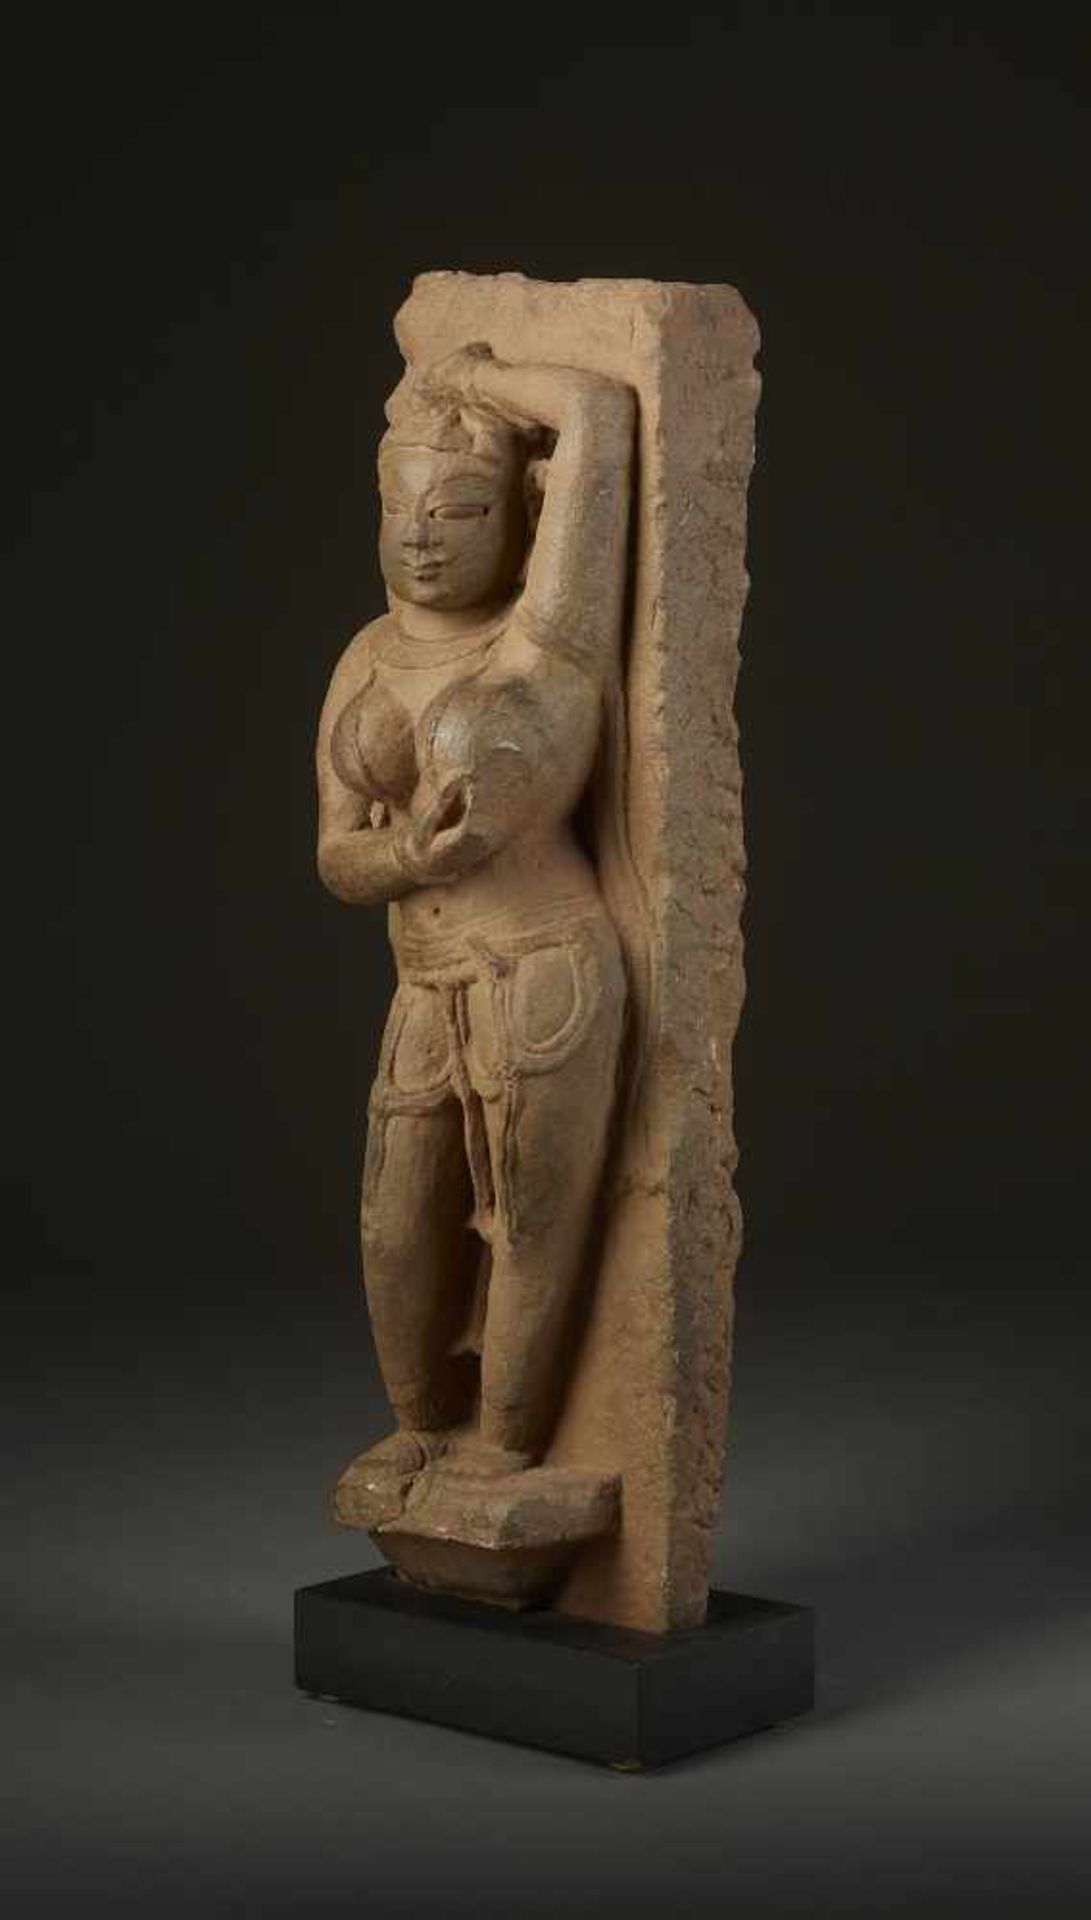 A SANDSTONE YAKSHINI 10th CENTURYCentral India, 10th - 11th century. The pillar fragment carved in - Image 4 of 10